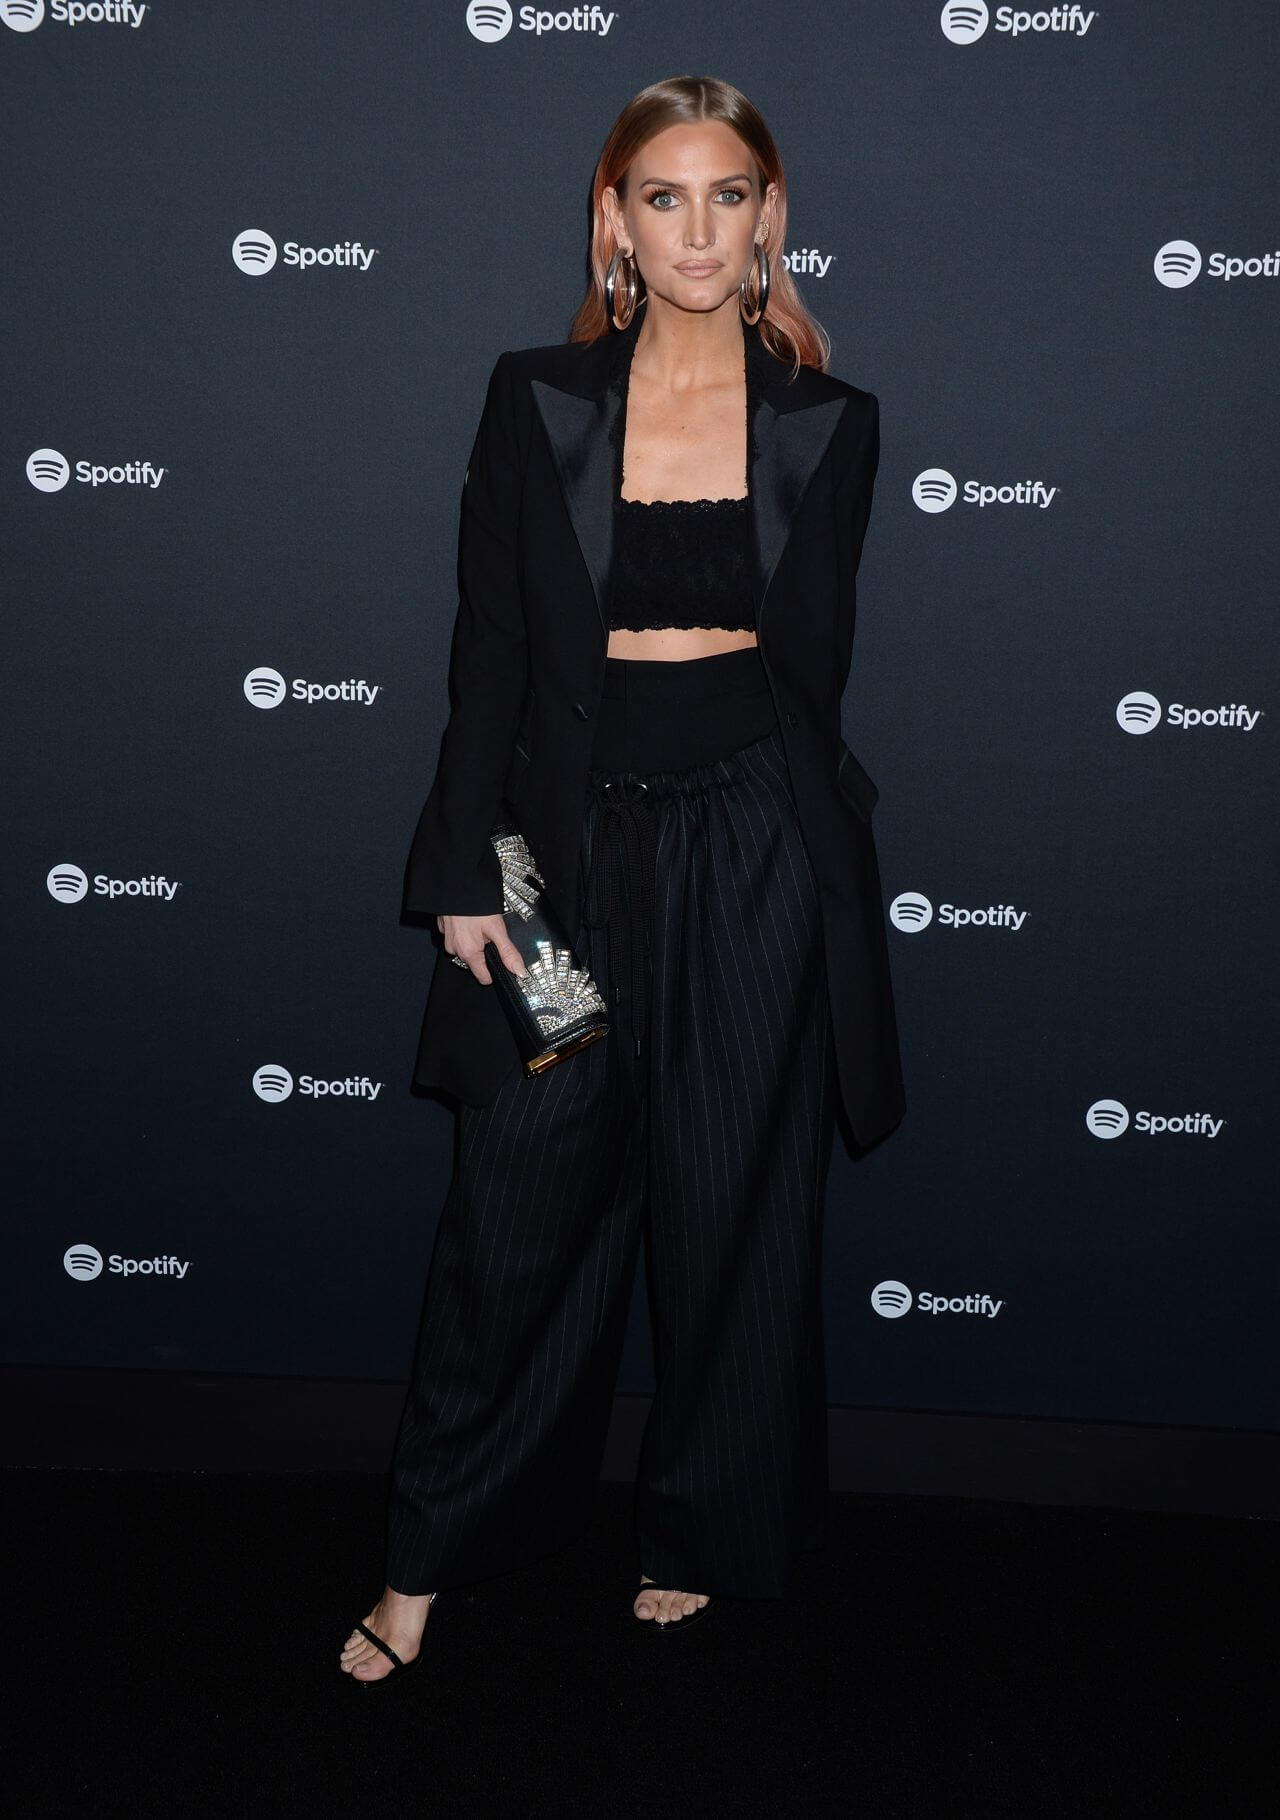 Ashlee Simpson  In Black Tube Top & Blazer With Flare Pants At Spotify Best New Artist Party in LA